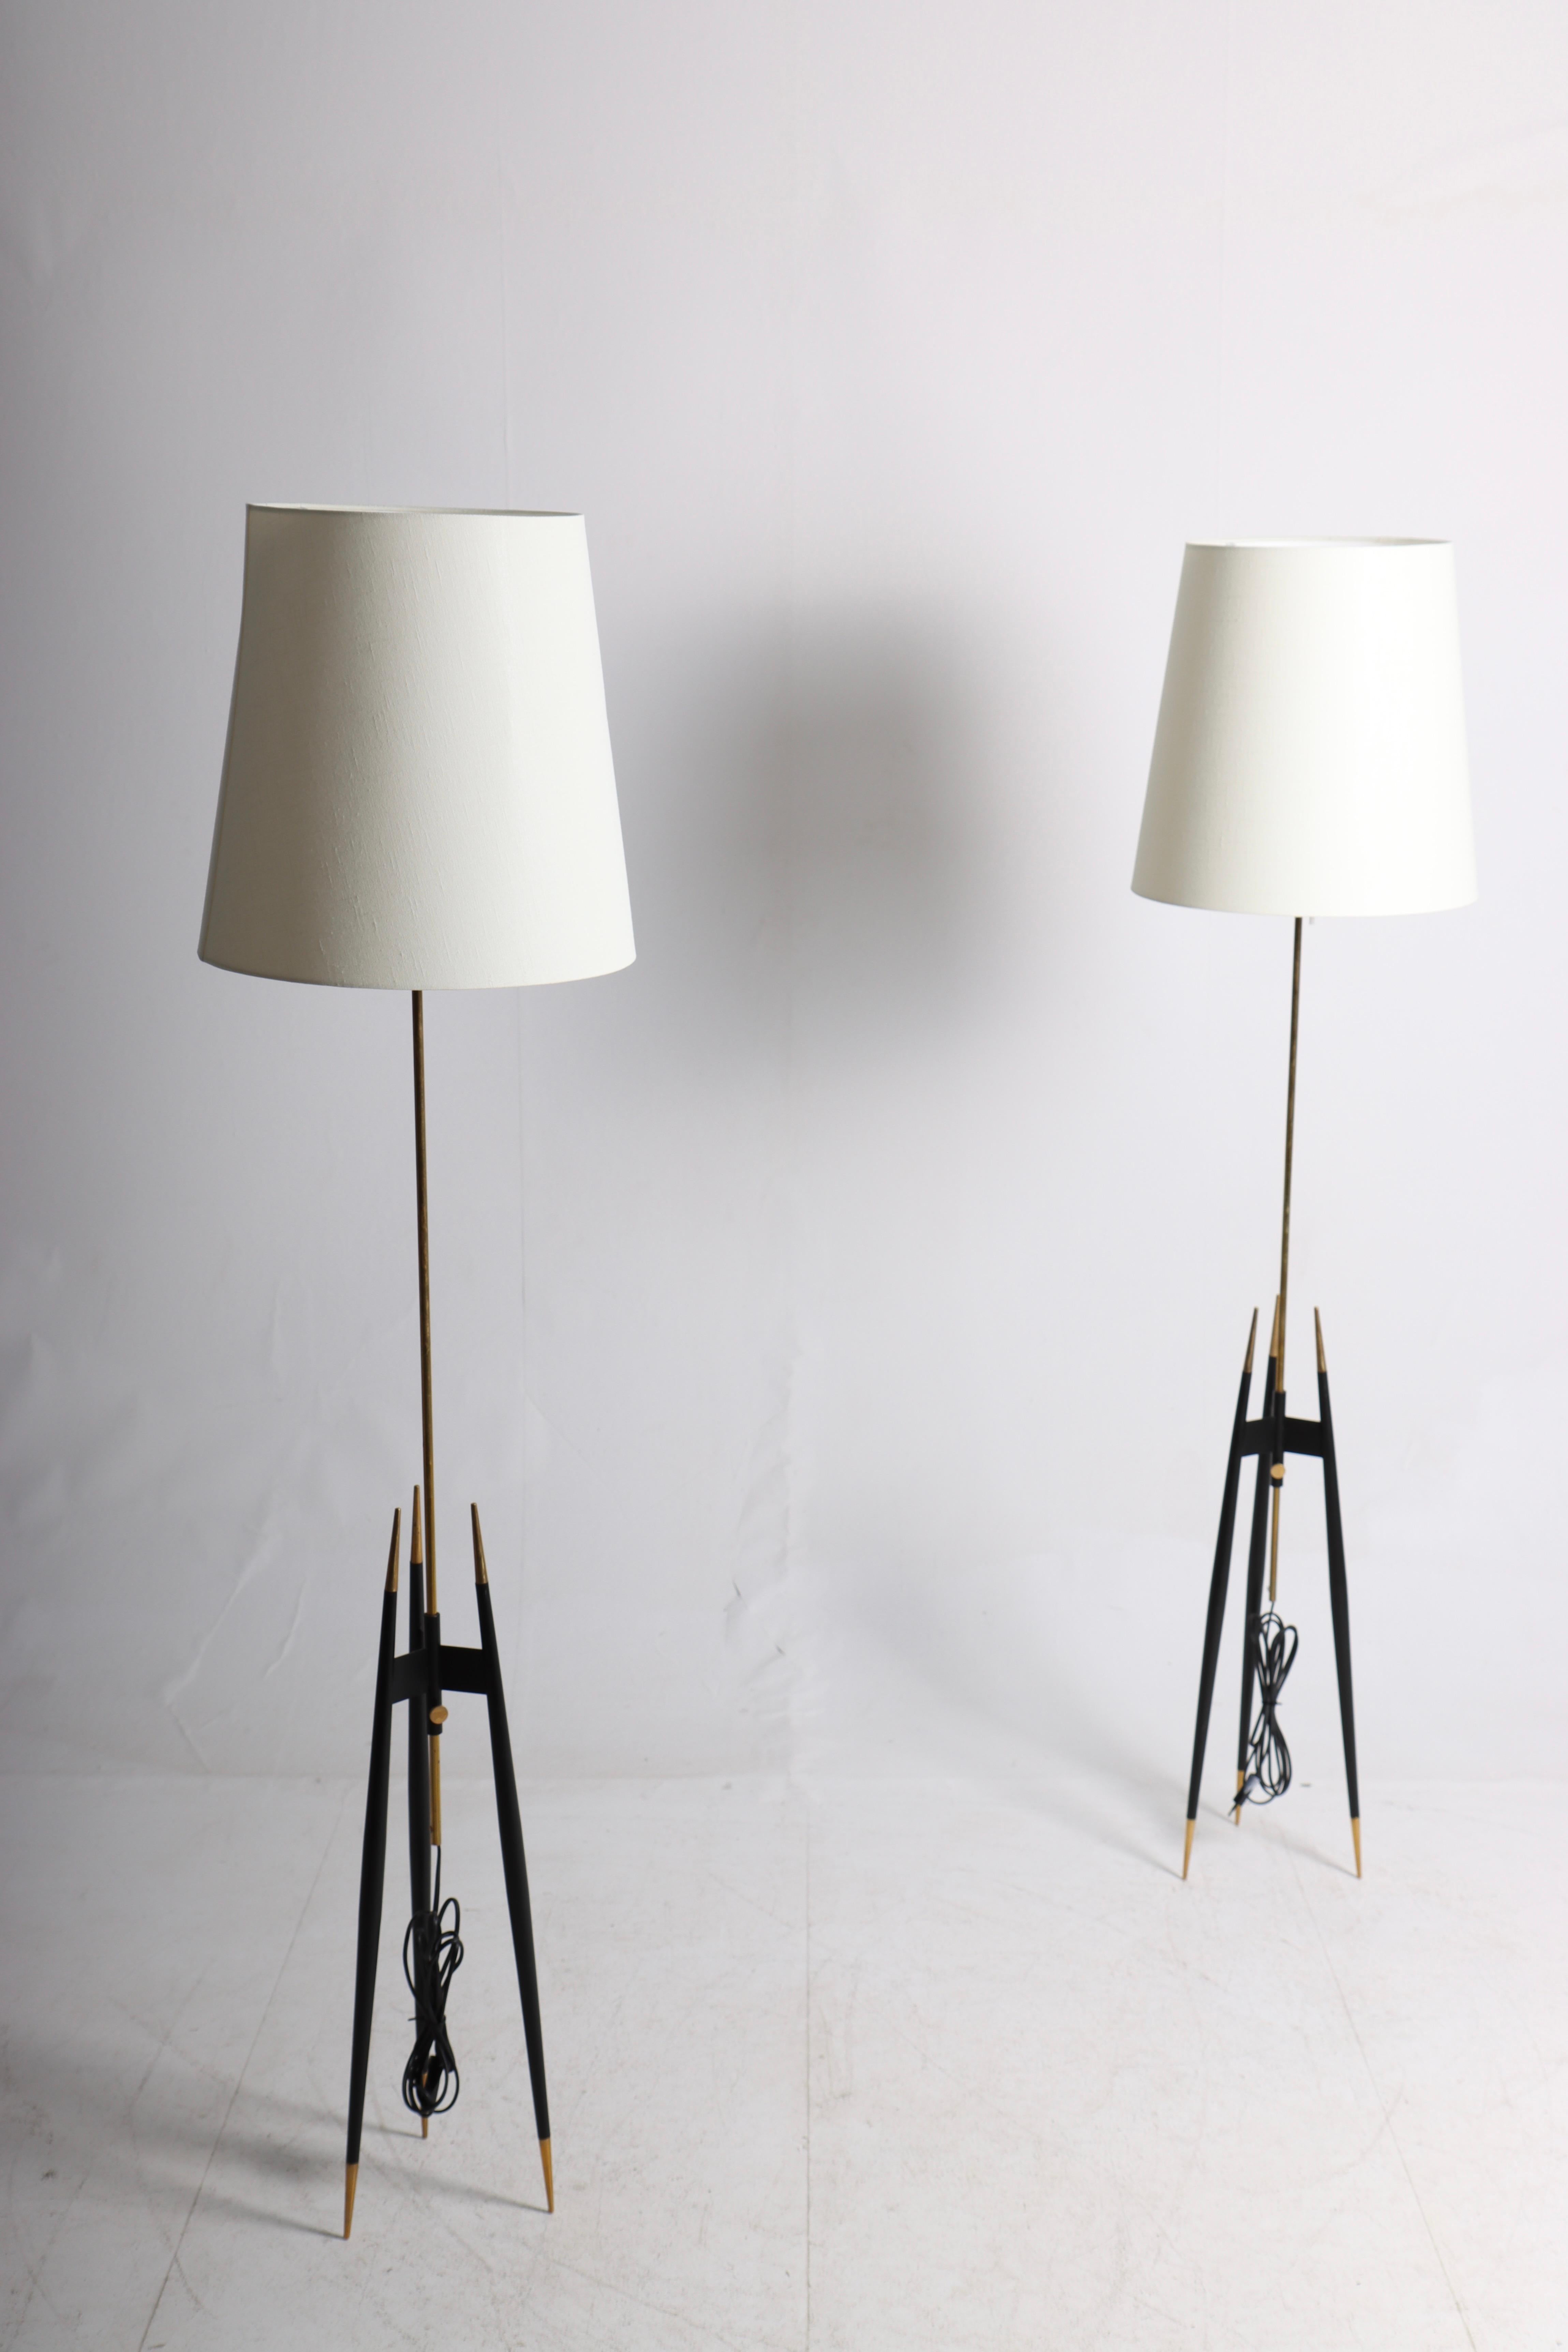 Pair of great looking floor lamps with adjustable height in black painted metal and brass. Designed and made by S. A. Holm Sørensen in the mid-1950s. Great original condition.